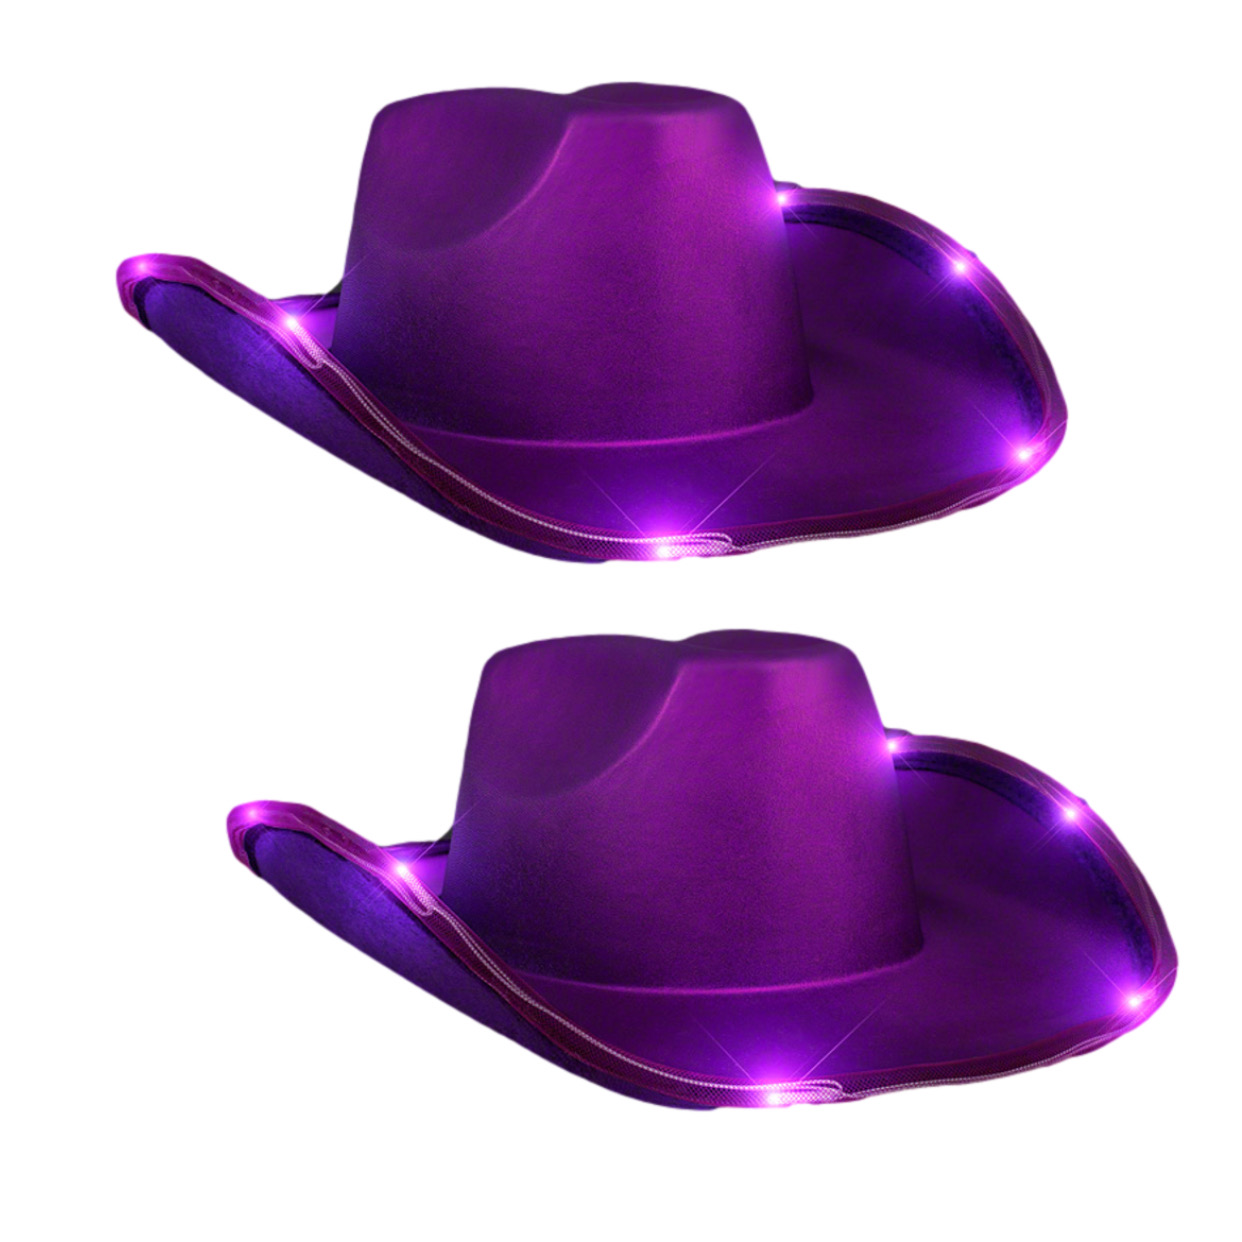 Light Up Shiny Satin Metallic Space Cowboy Hat Purple Pack of 2 All Products 3